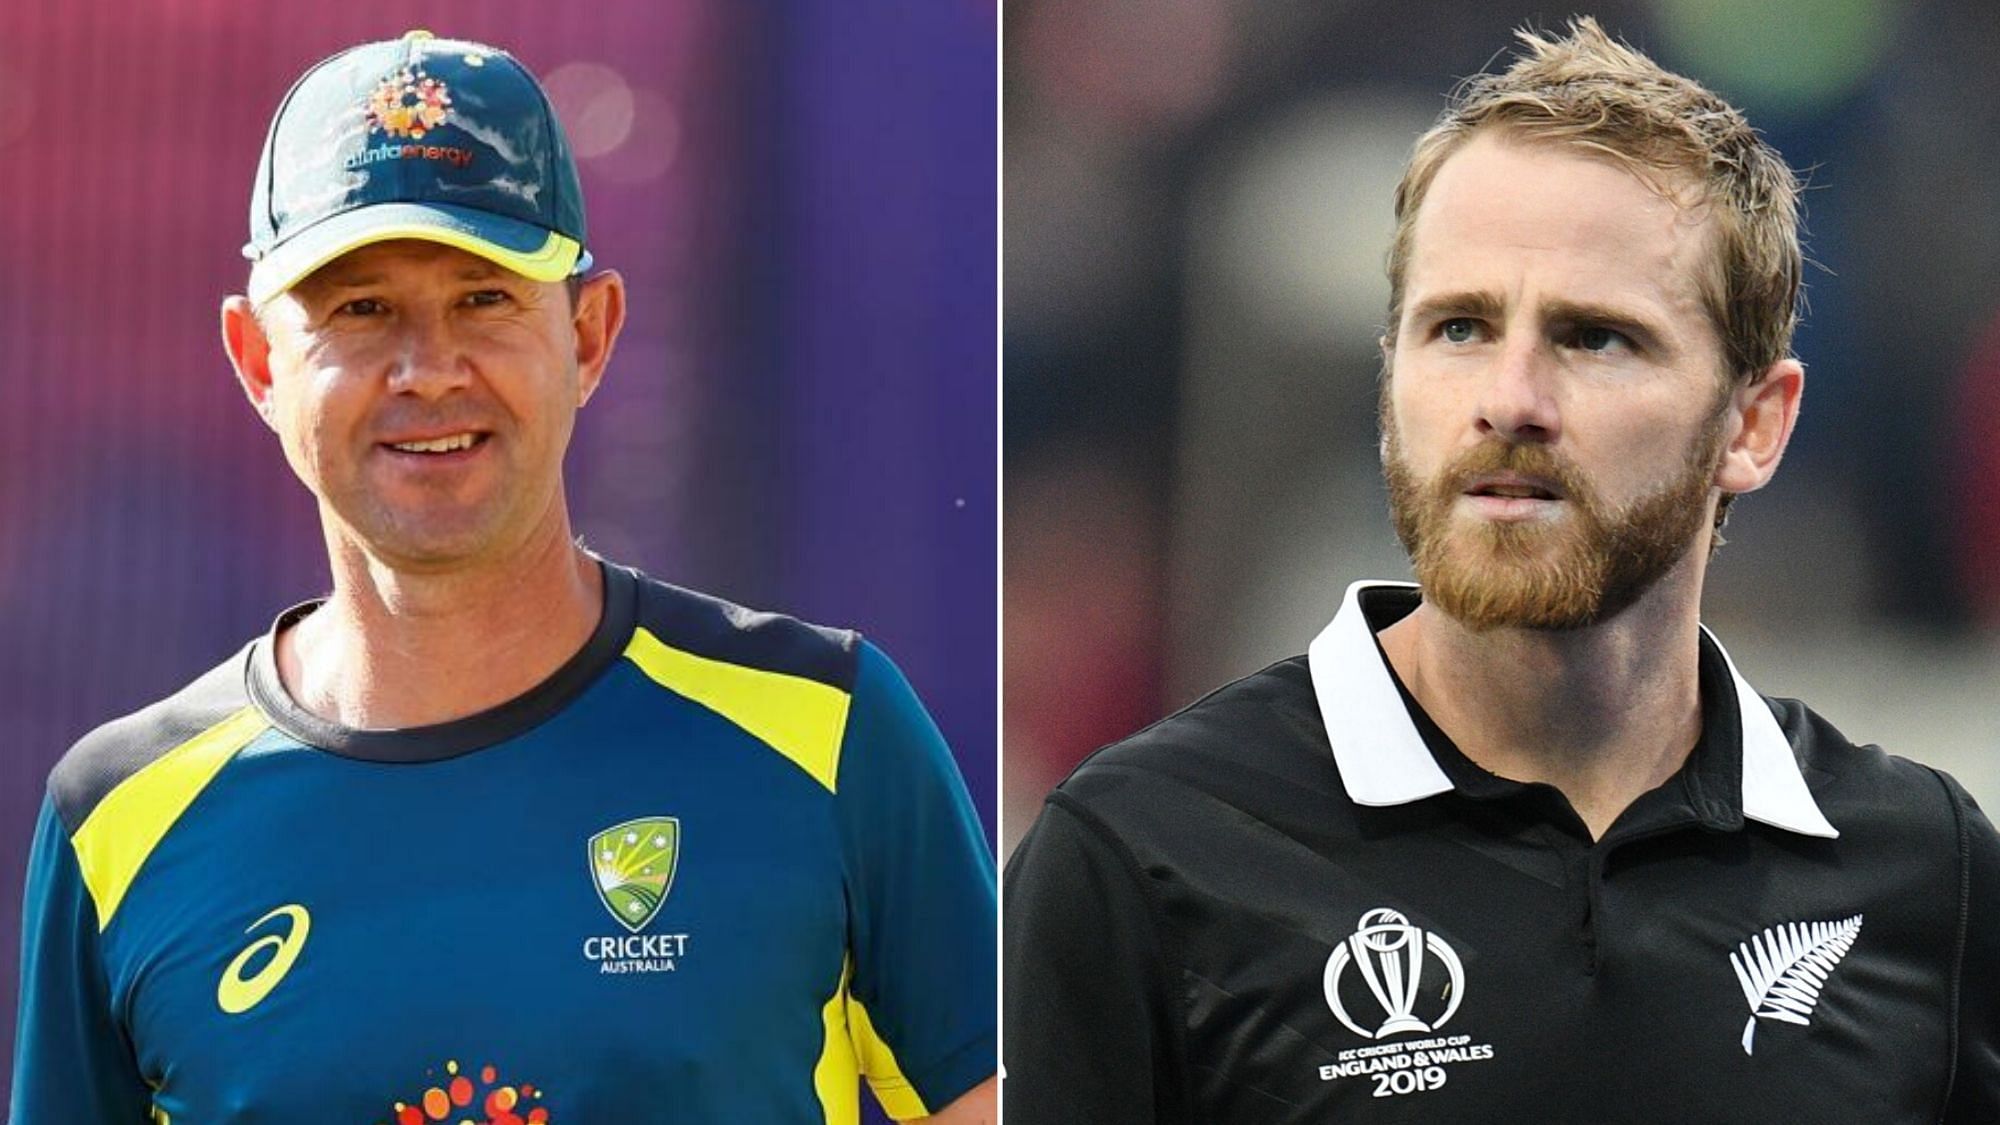 Ricky Ponting feels  that Kane Williamson has turned into a great cricketer in the shortest format of the game.